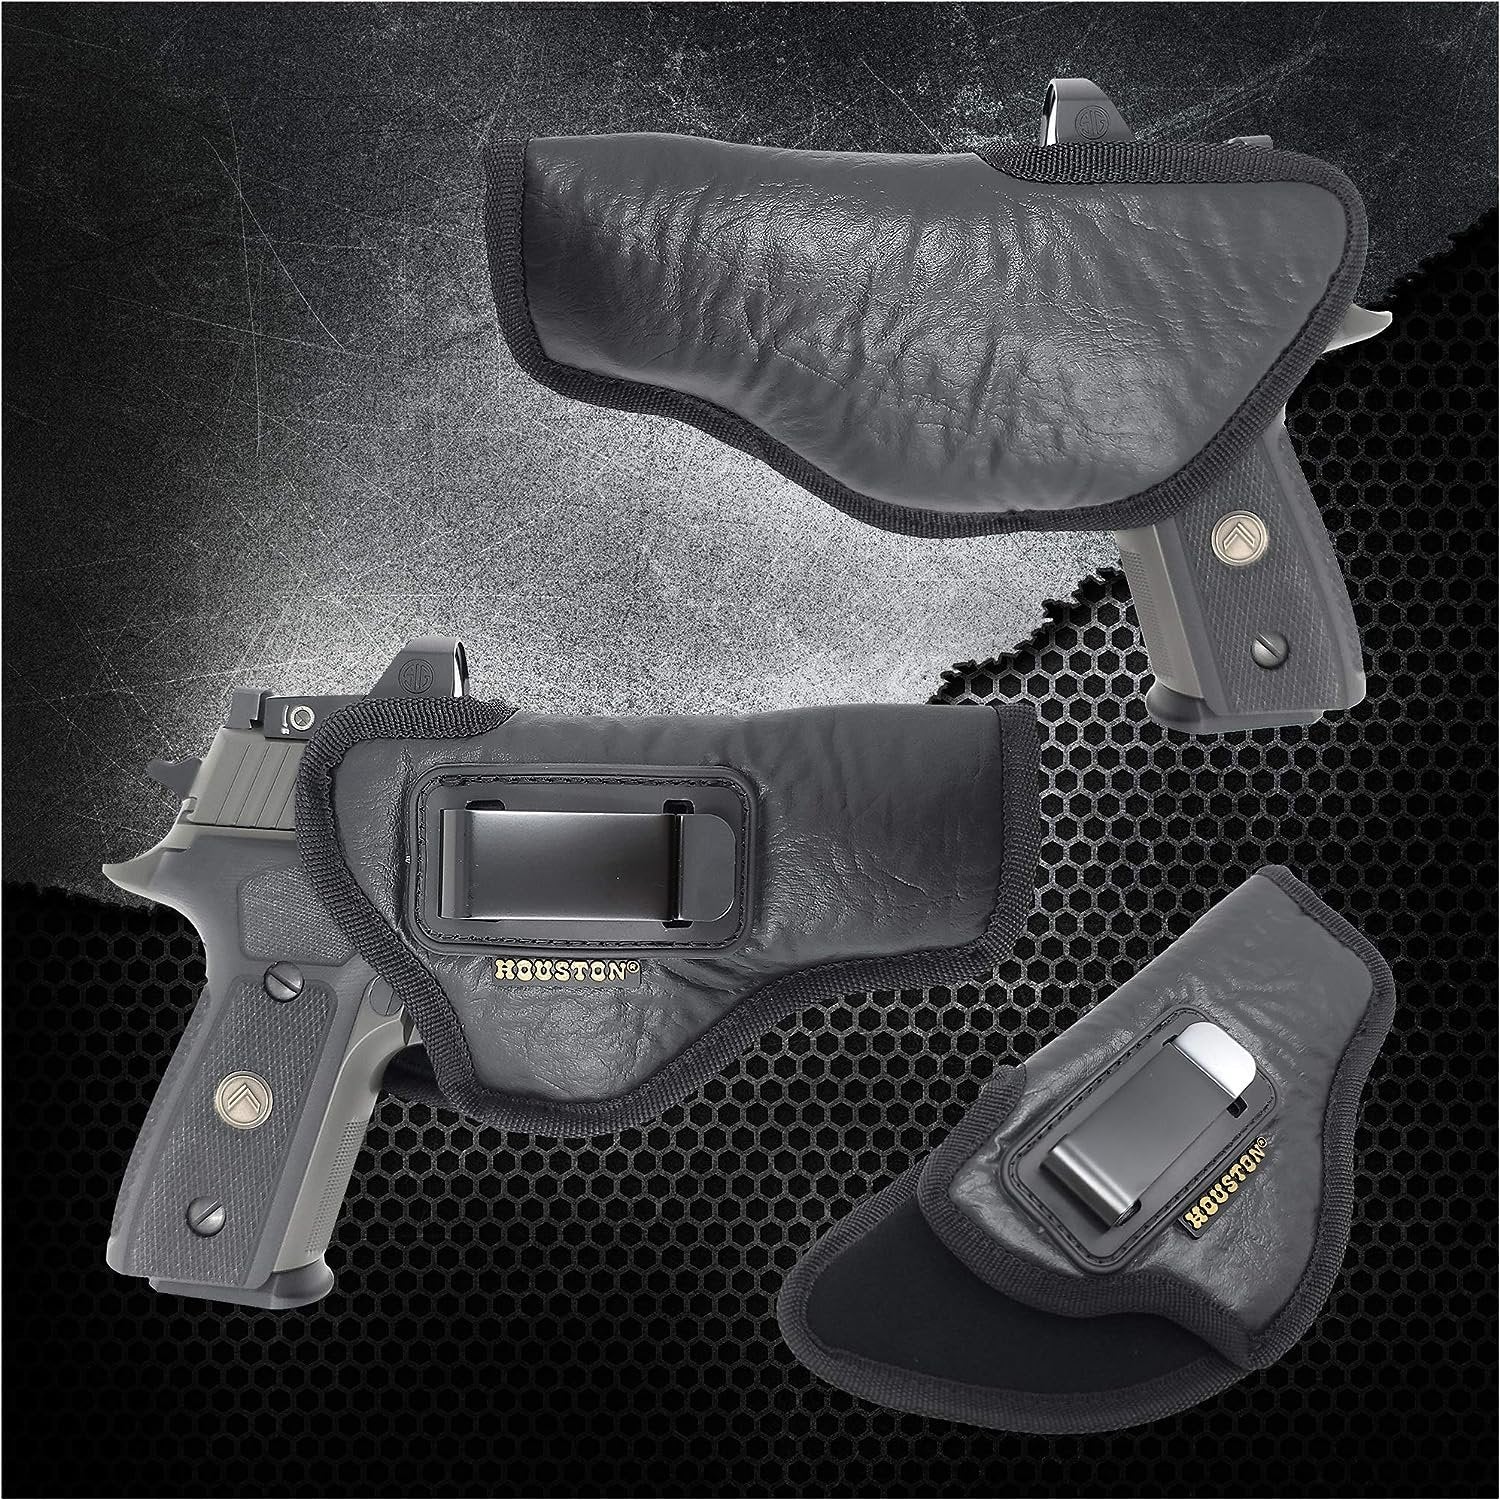 IWB Optical Gun Holster by Houston - ECO Leather Concealed Carry Soft Material | FITS Beretta 92FS | FN 5.7 | Canik TP9 SFX | RGR 57 | SIG P320 X5 | Beretta APX Target | GLK 34 35 41 (Right) Black